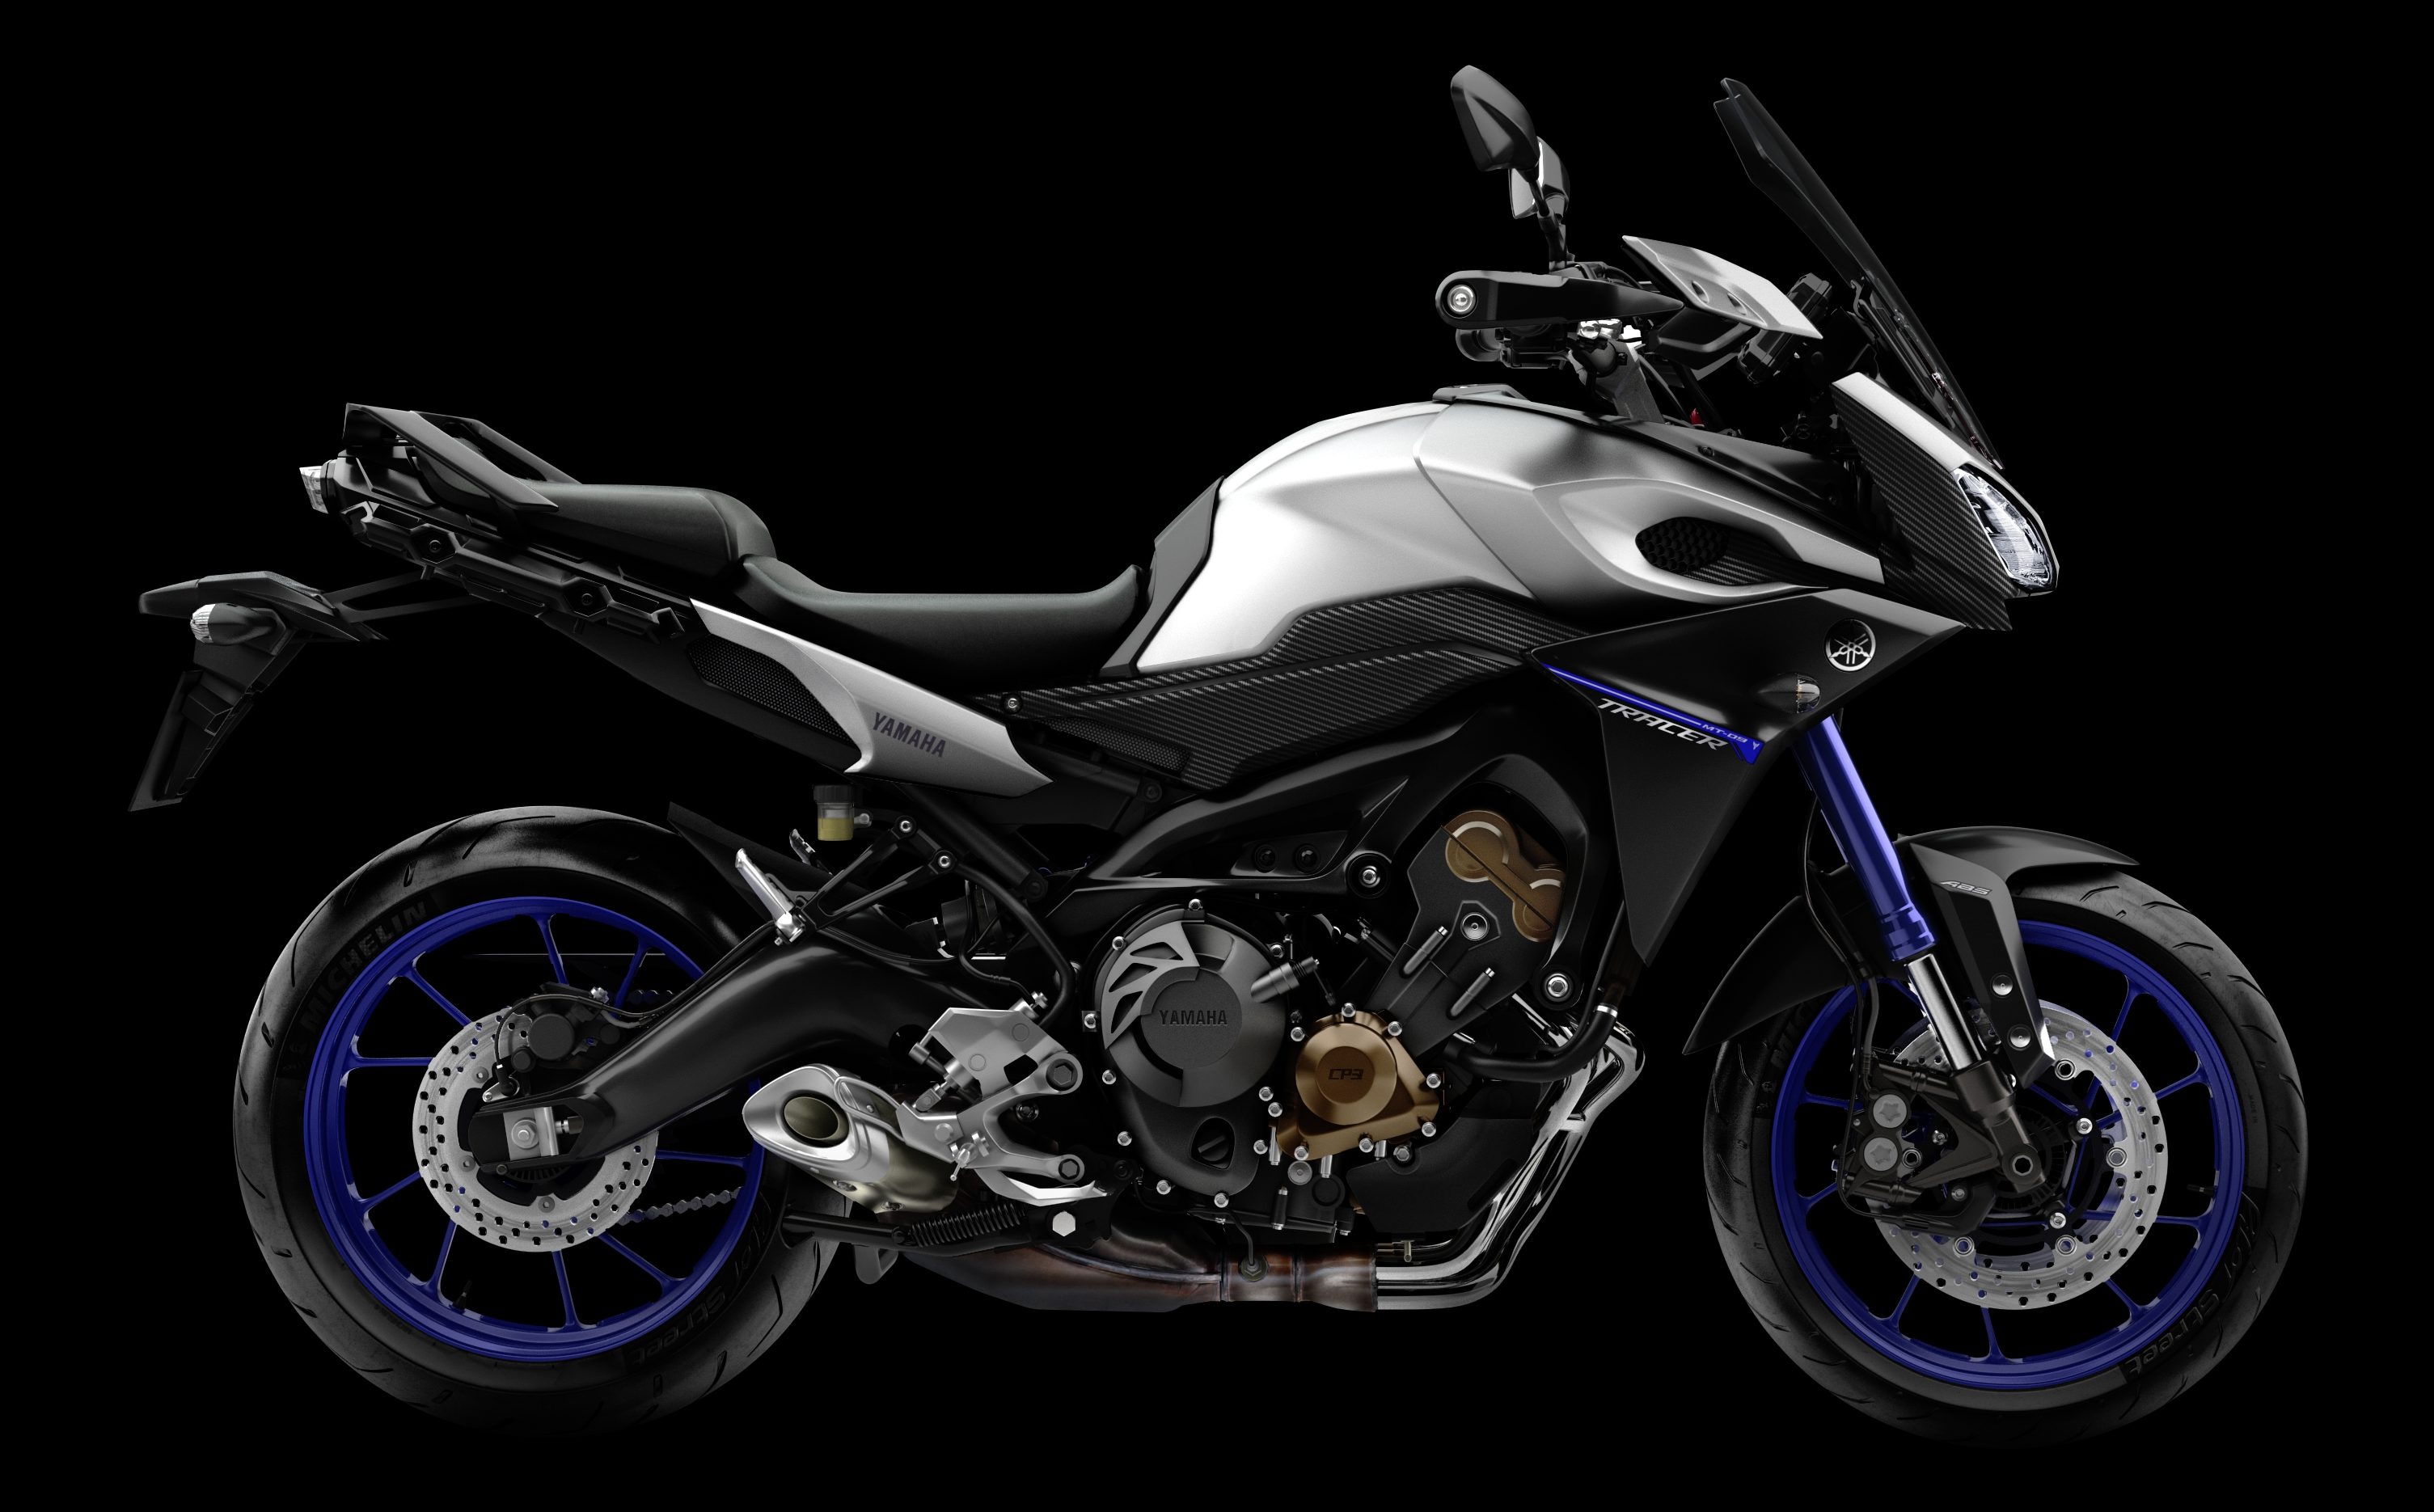 2016 Yamaha MT-09 Tracer in Malaysia - RM59,900 Image 514859